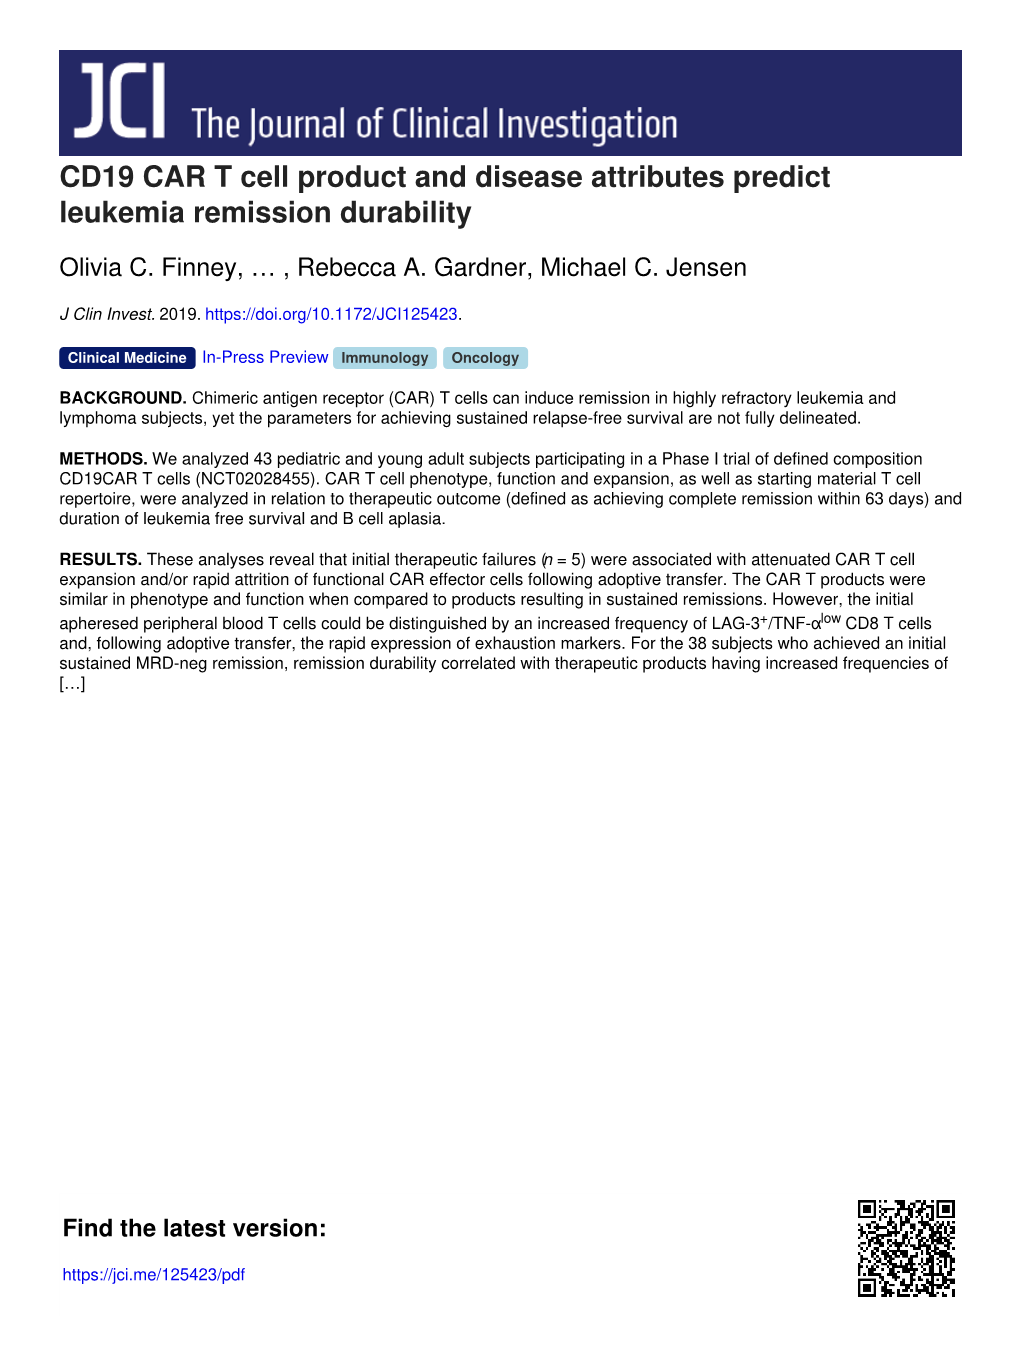 CD19 CAR T Cell Product and Disease Attributes Predict Leukemia Remission Durability